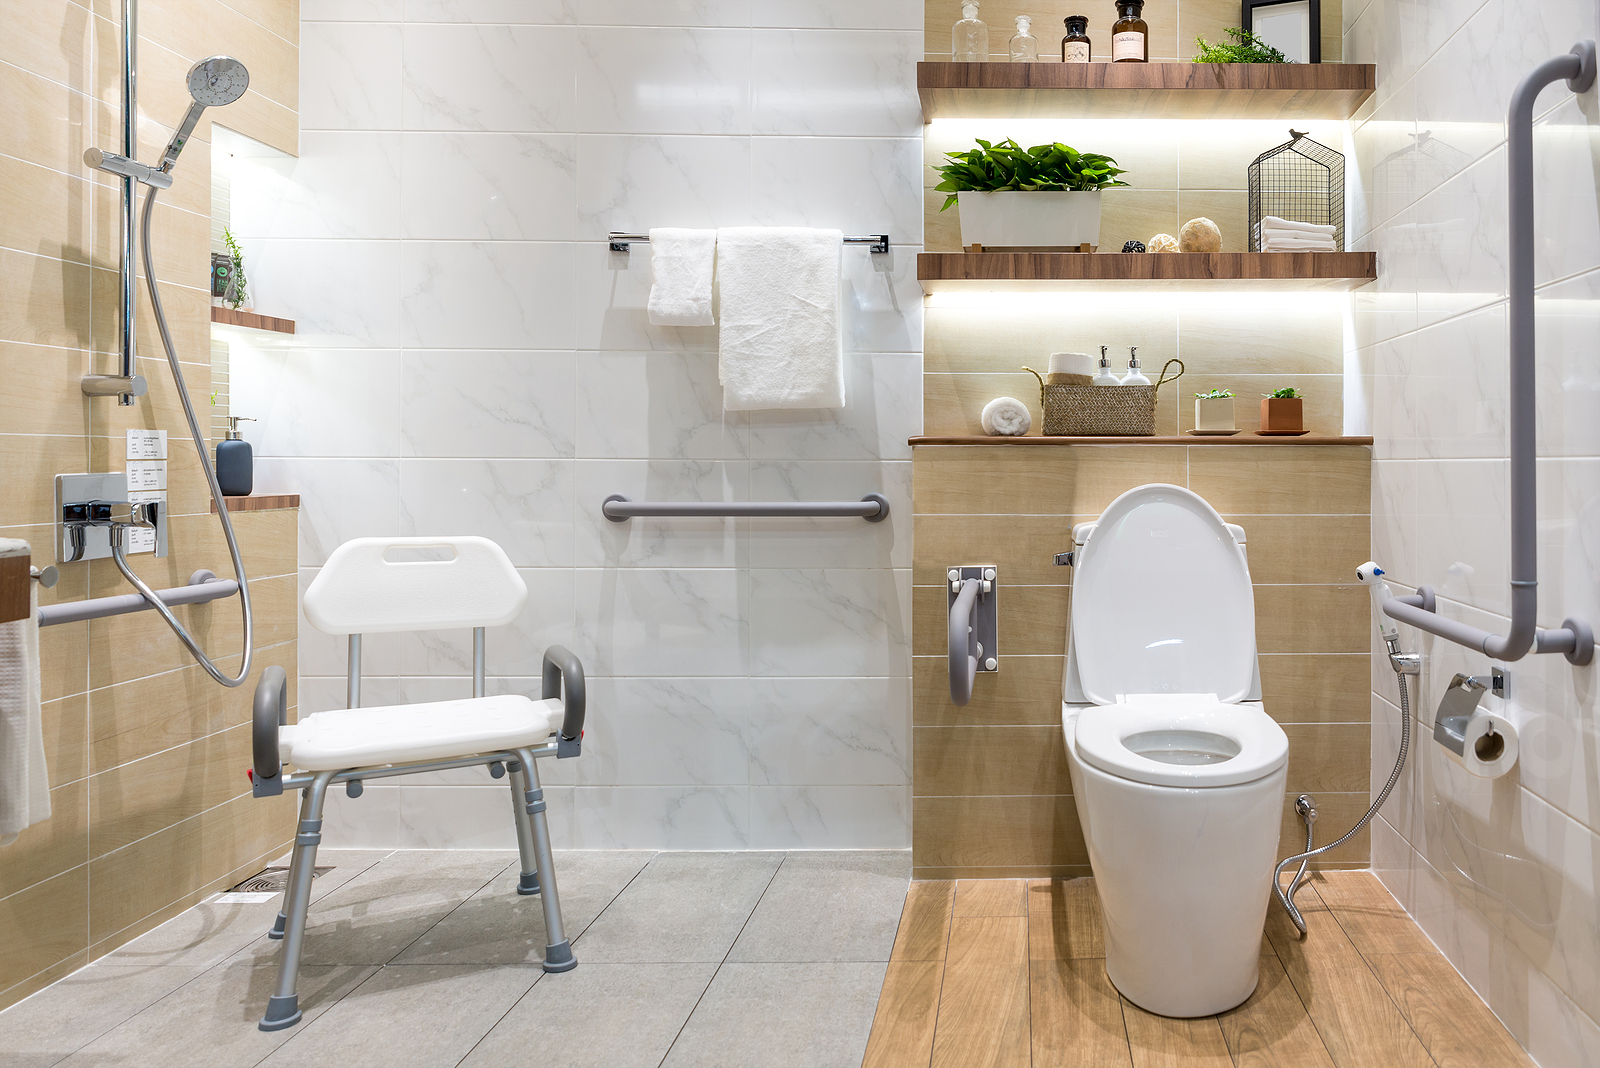 shower seat - Interior of bathroom for the disabled or elderly people